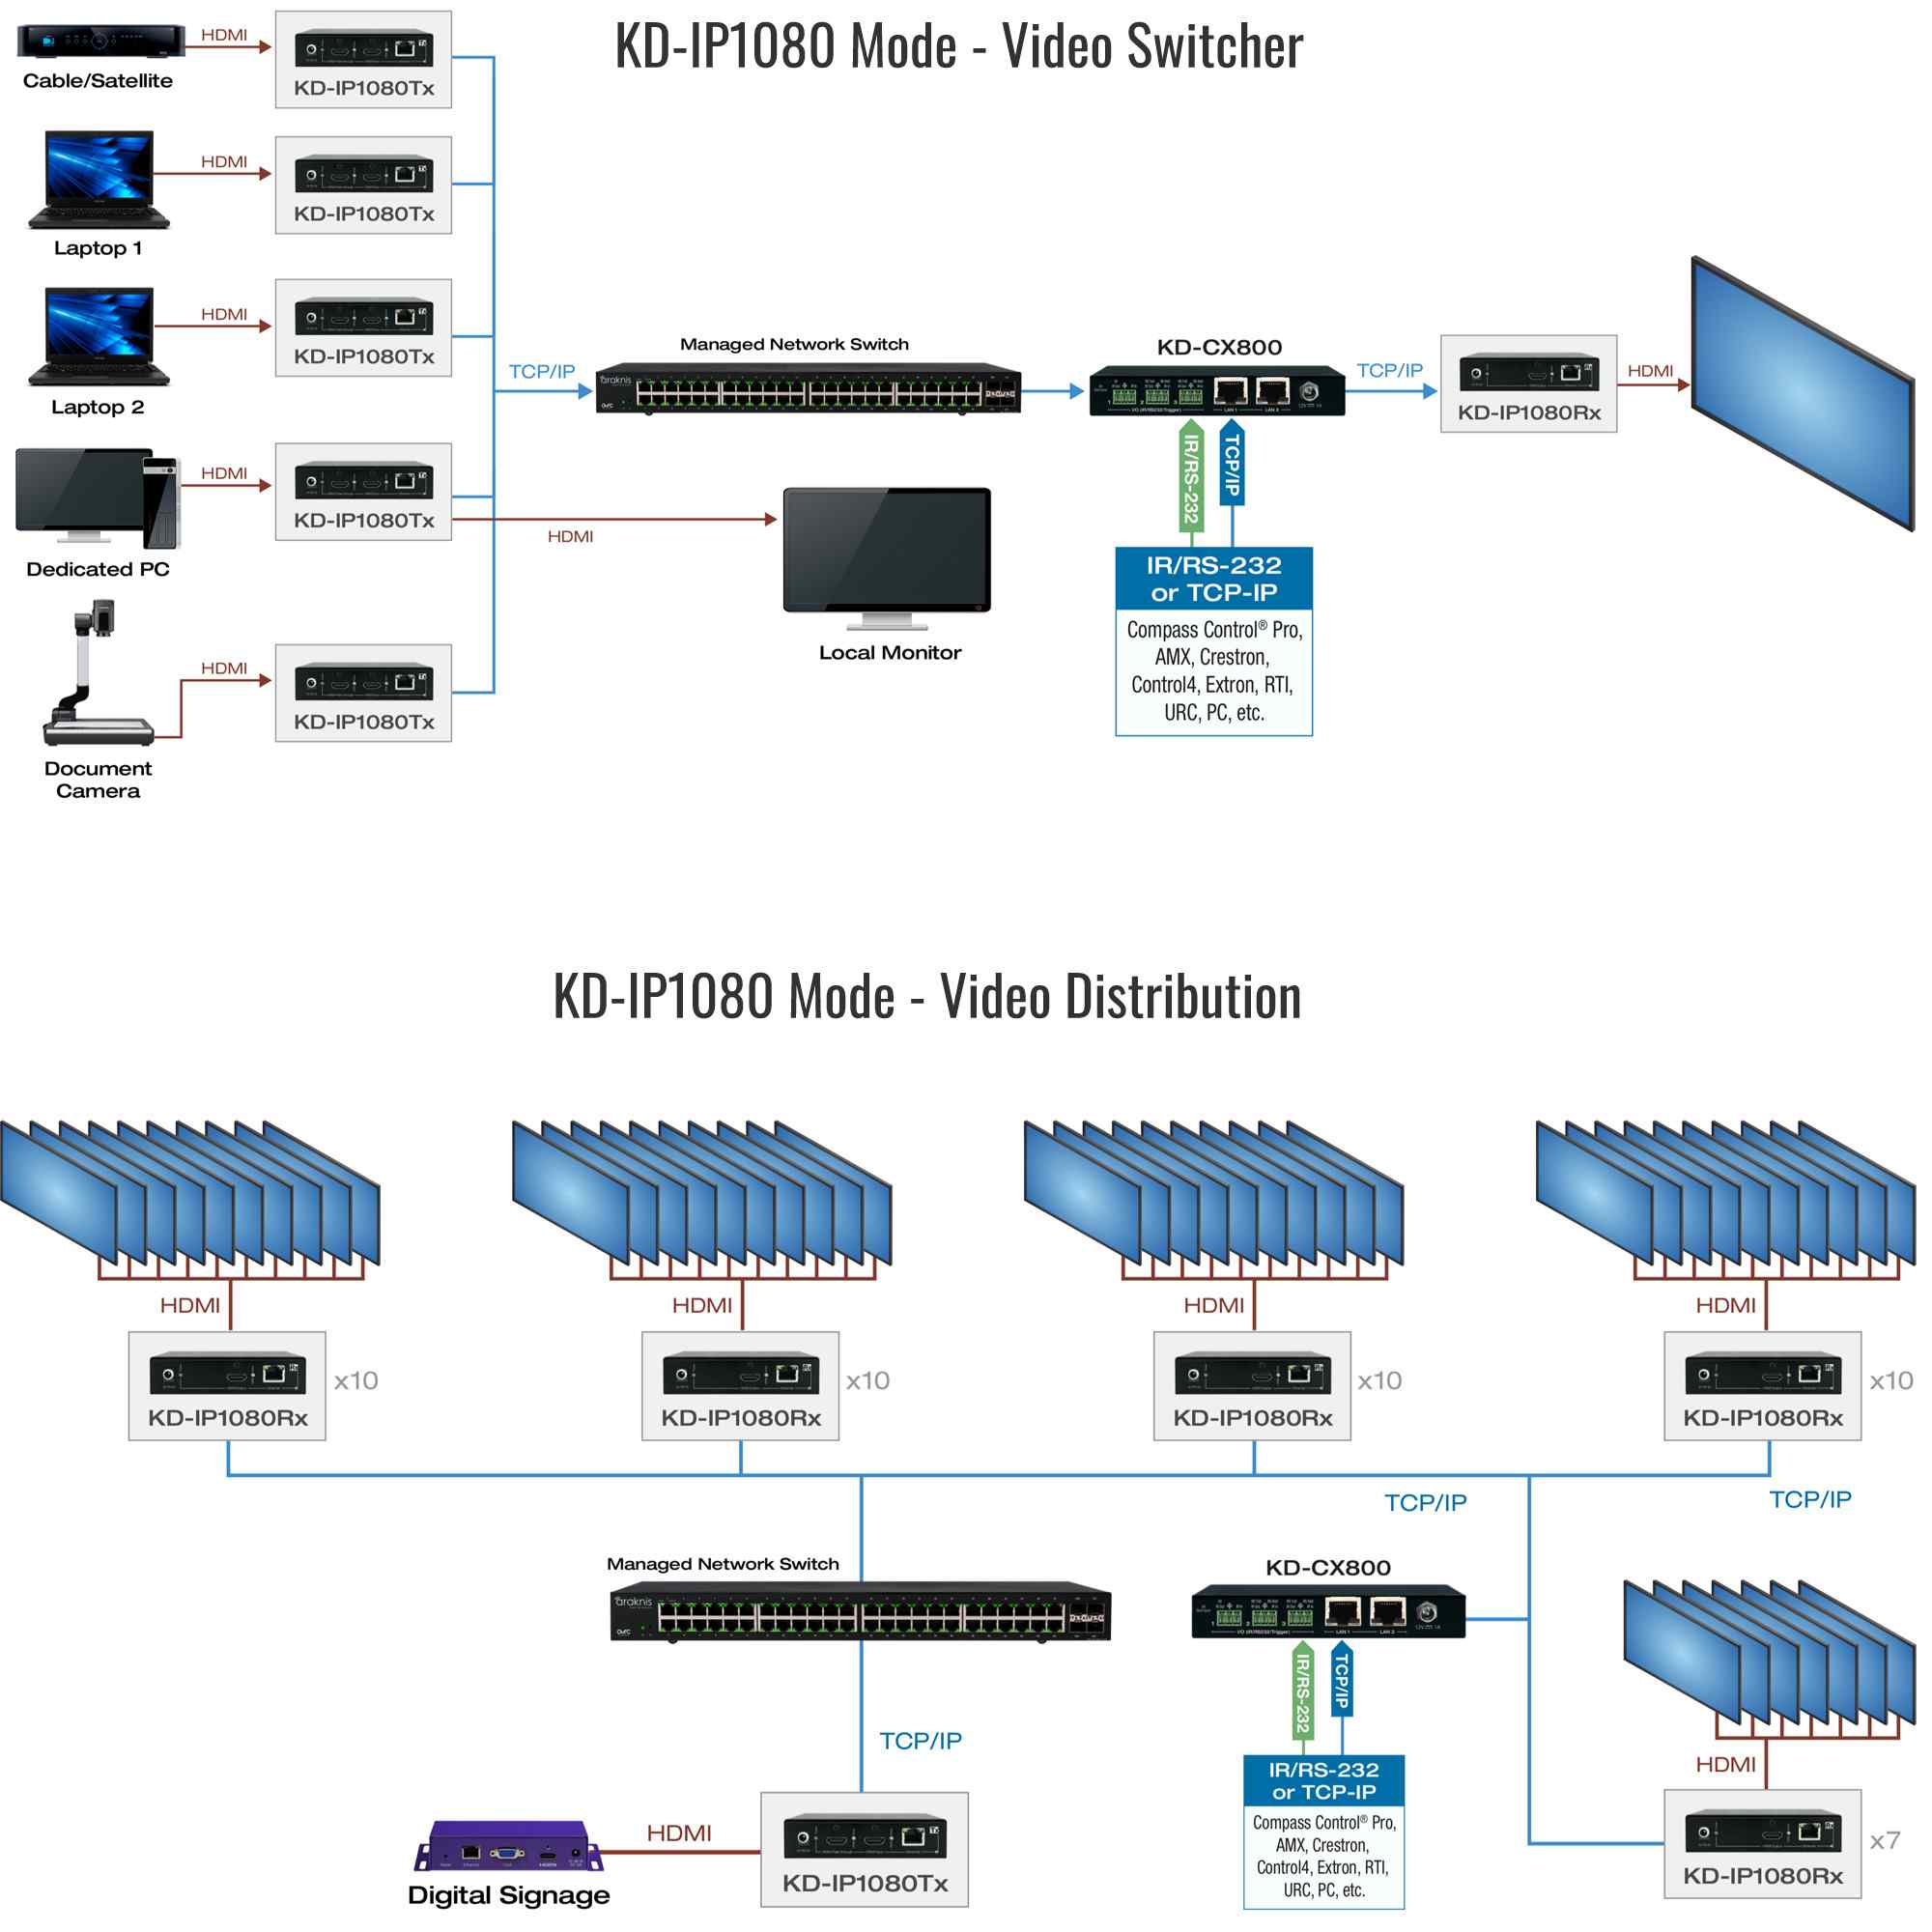 Example Diagram showing the video switch and distribution mode of HDMI transmitters